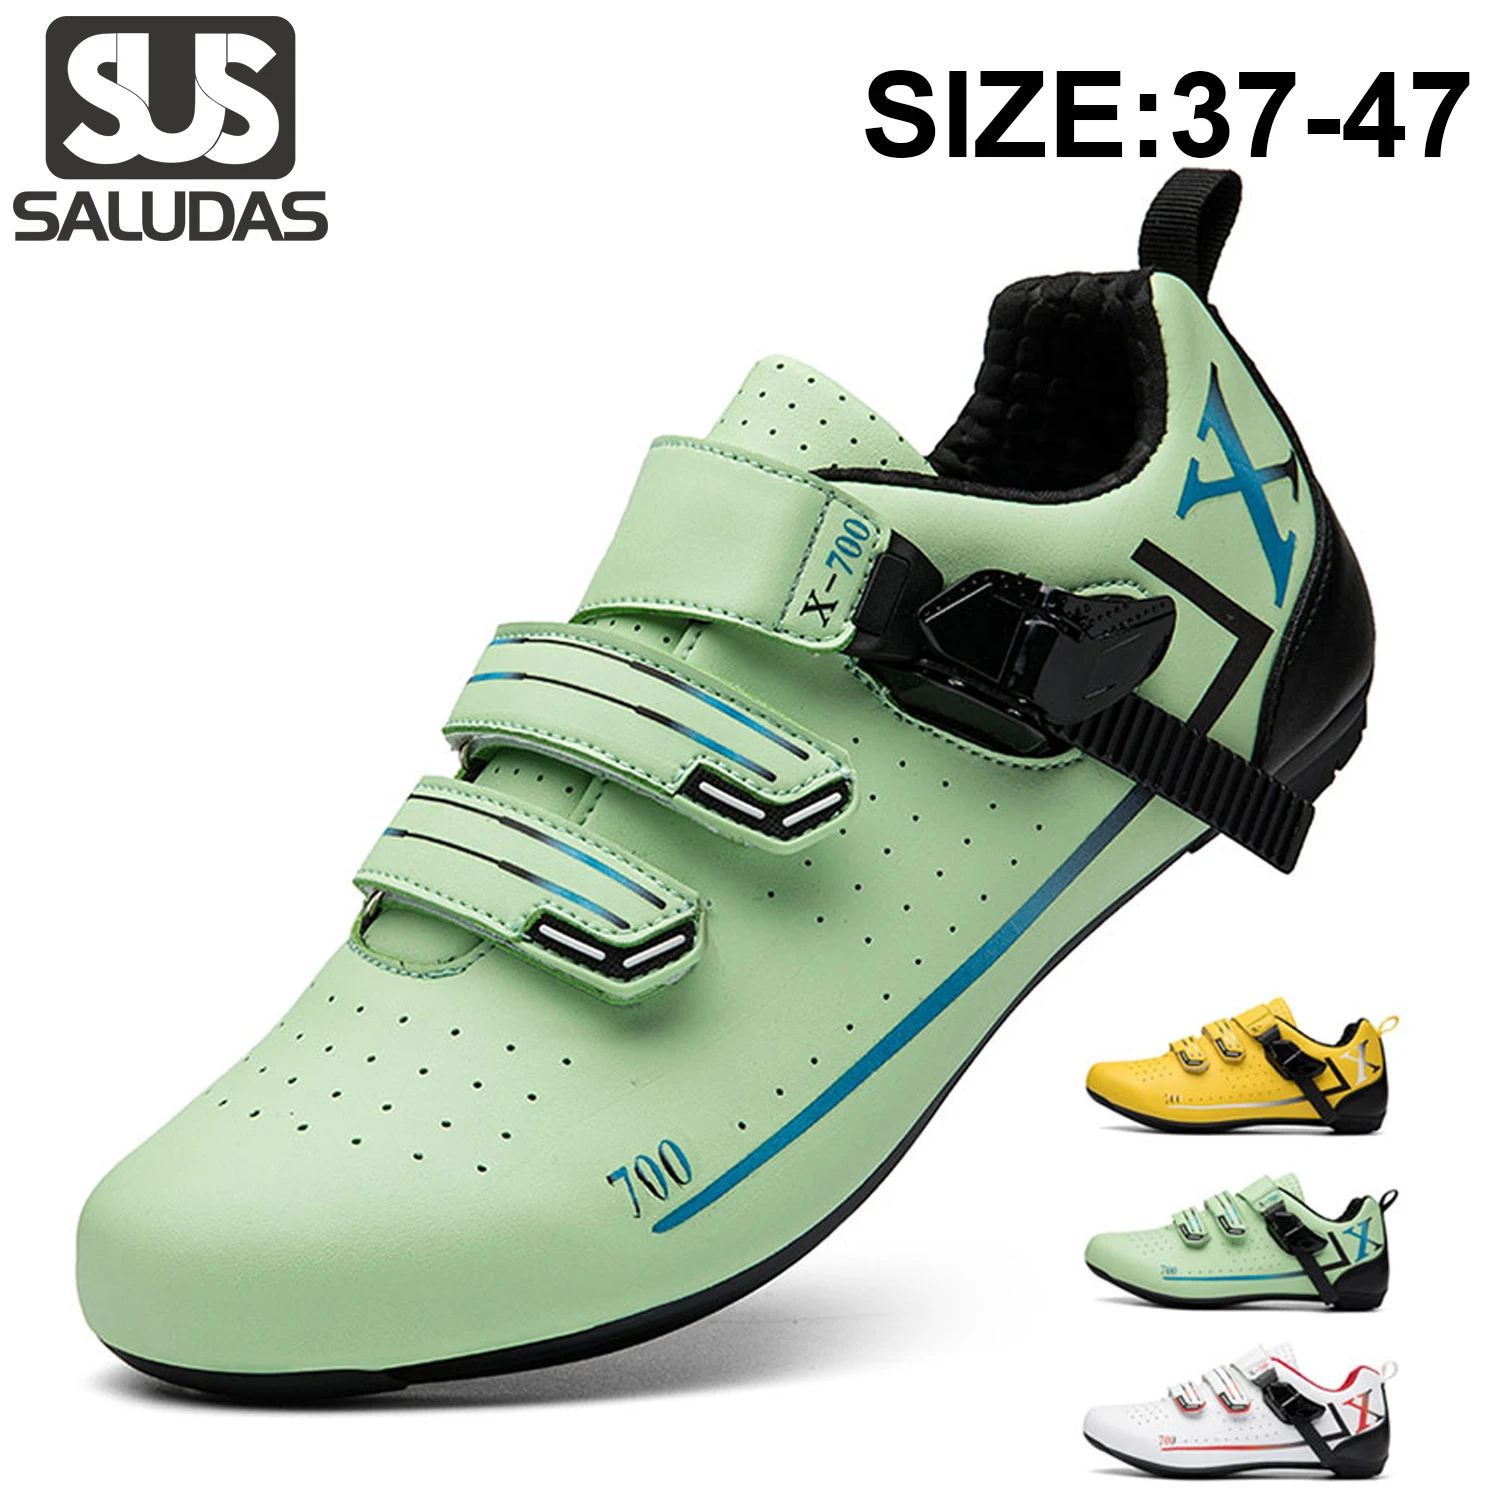 SALUDAS Cycling Shoes Men MTB Bicycle Speed Sneakers SPDd Shoes Outdoor Sport Bike Ricing Self-locking Sapatilha Ciclismo